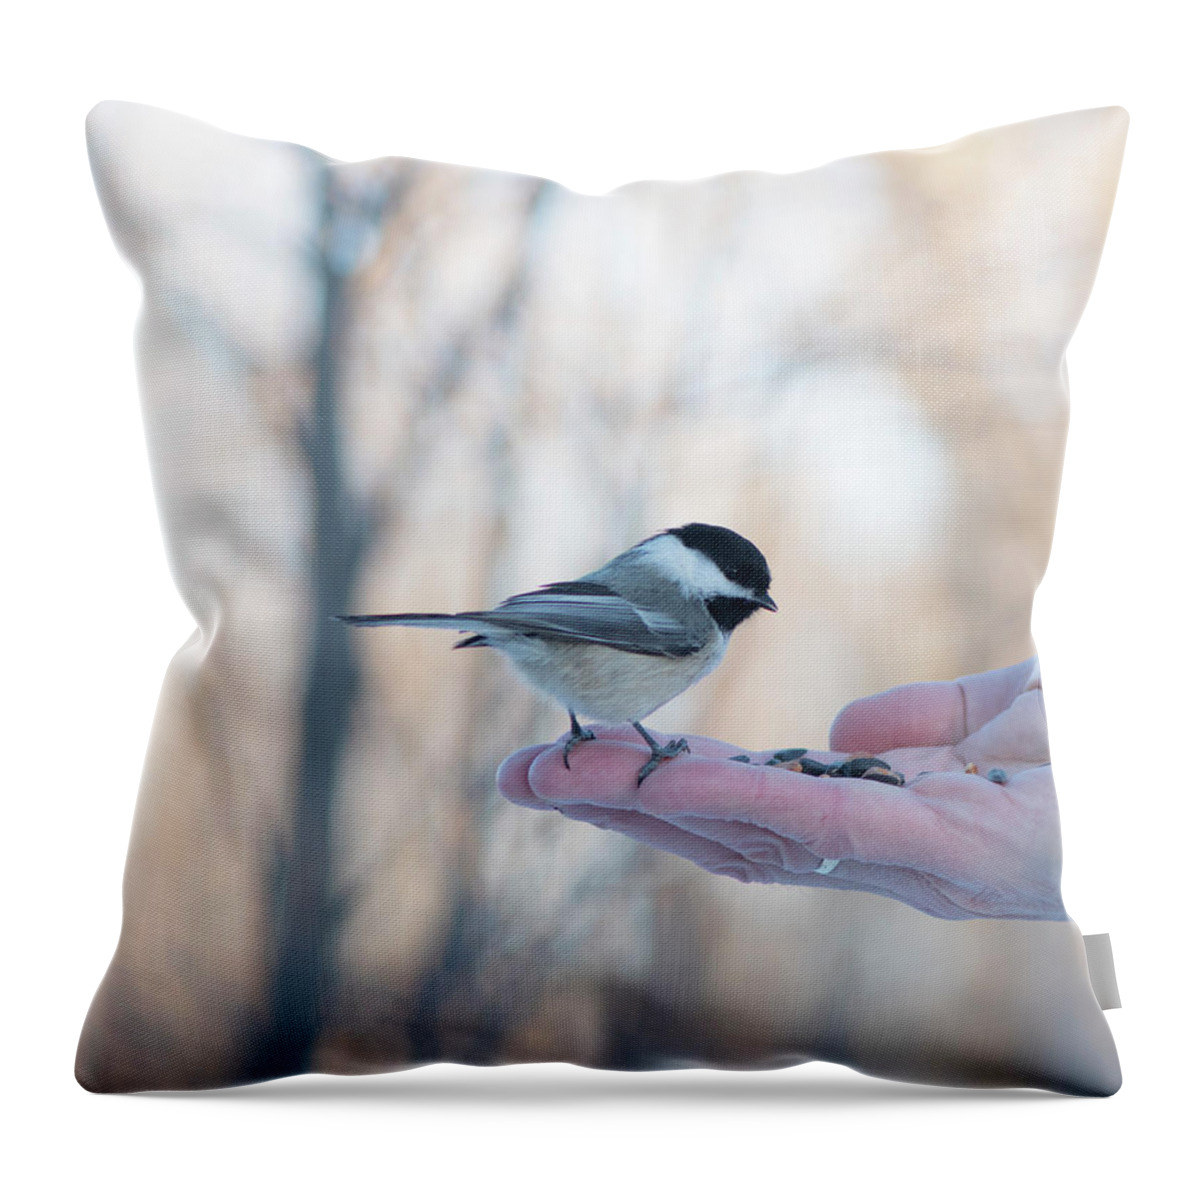 Chickadee Throw Pillow featuring the photograph Chickadee On Hand by Karen Rispin